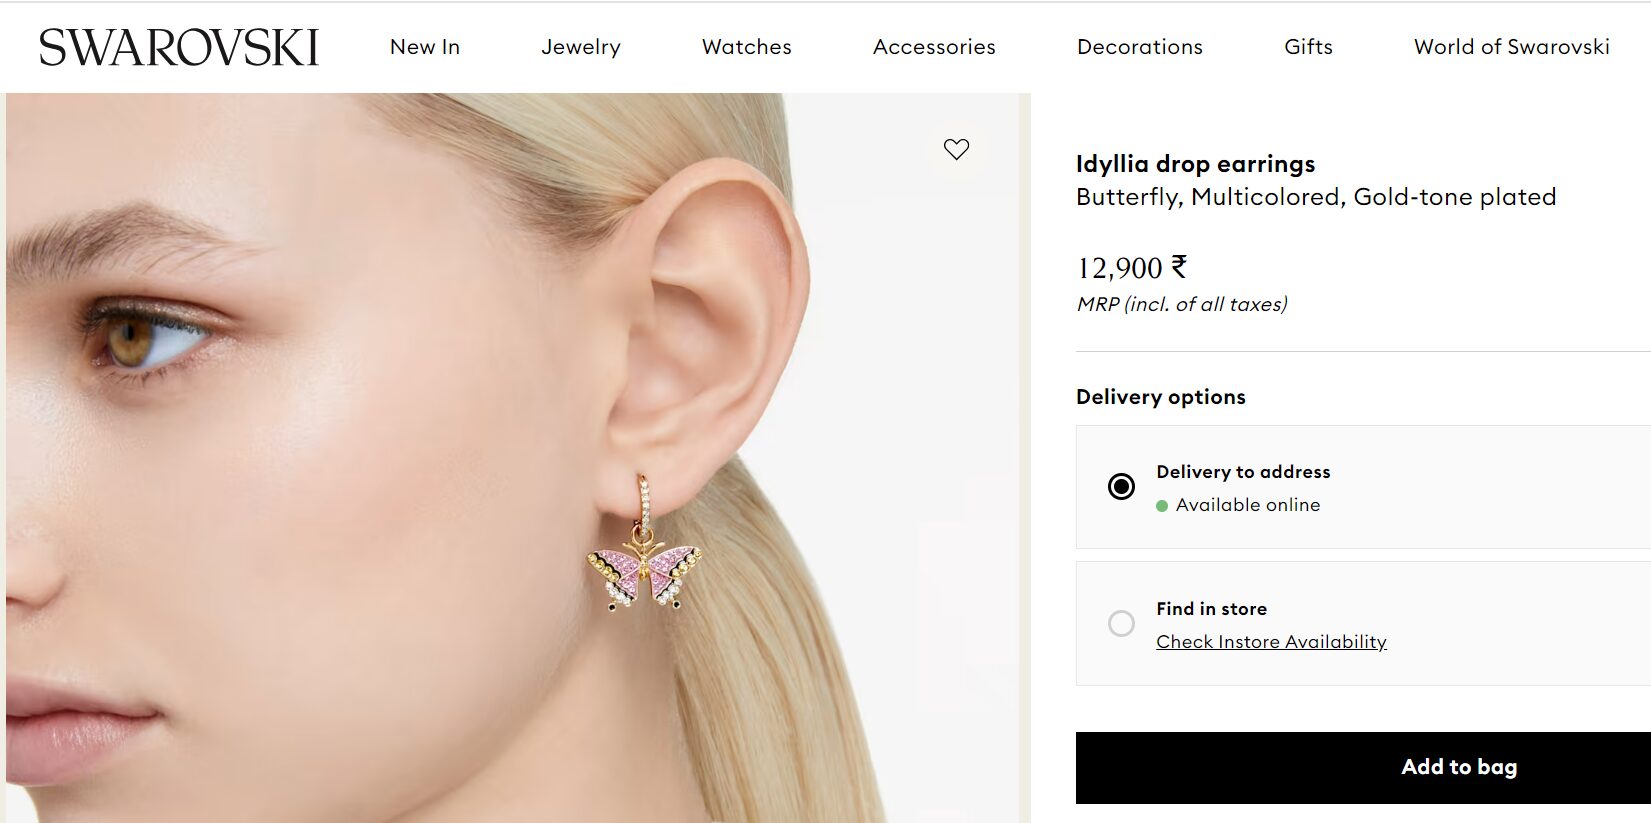 Price of the earrings